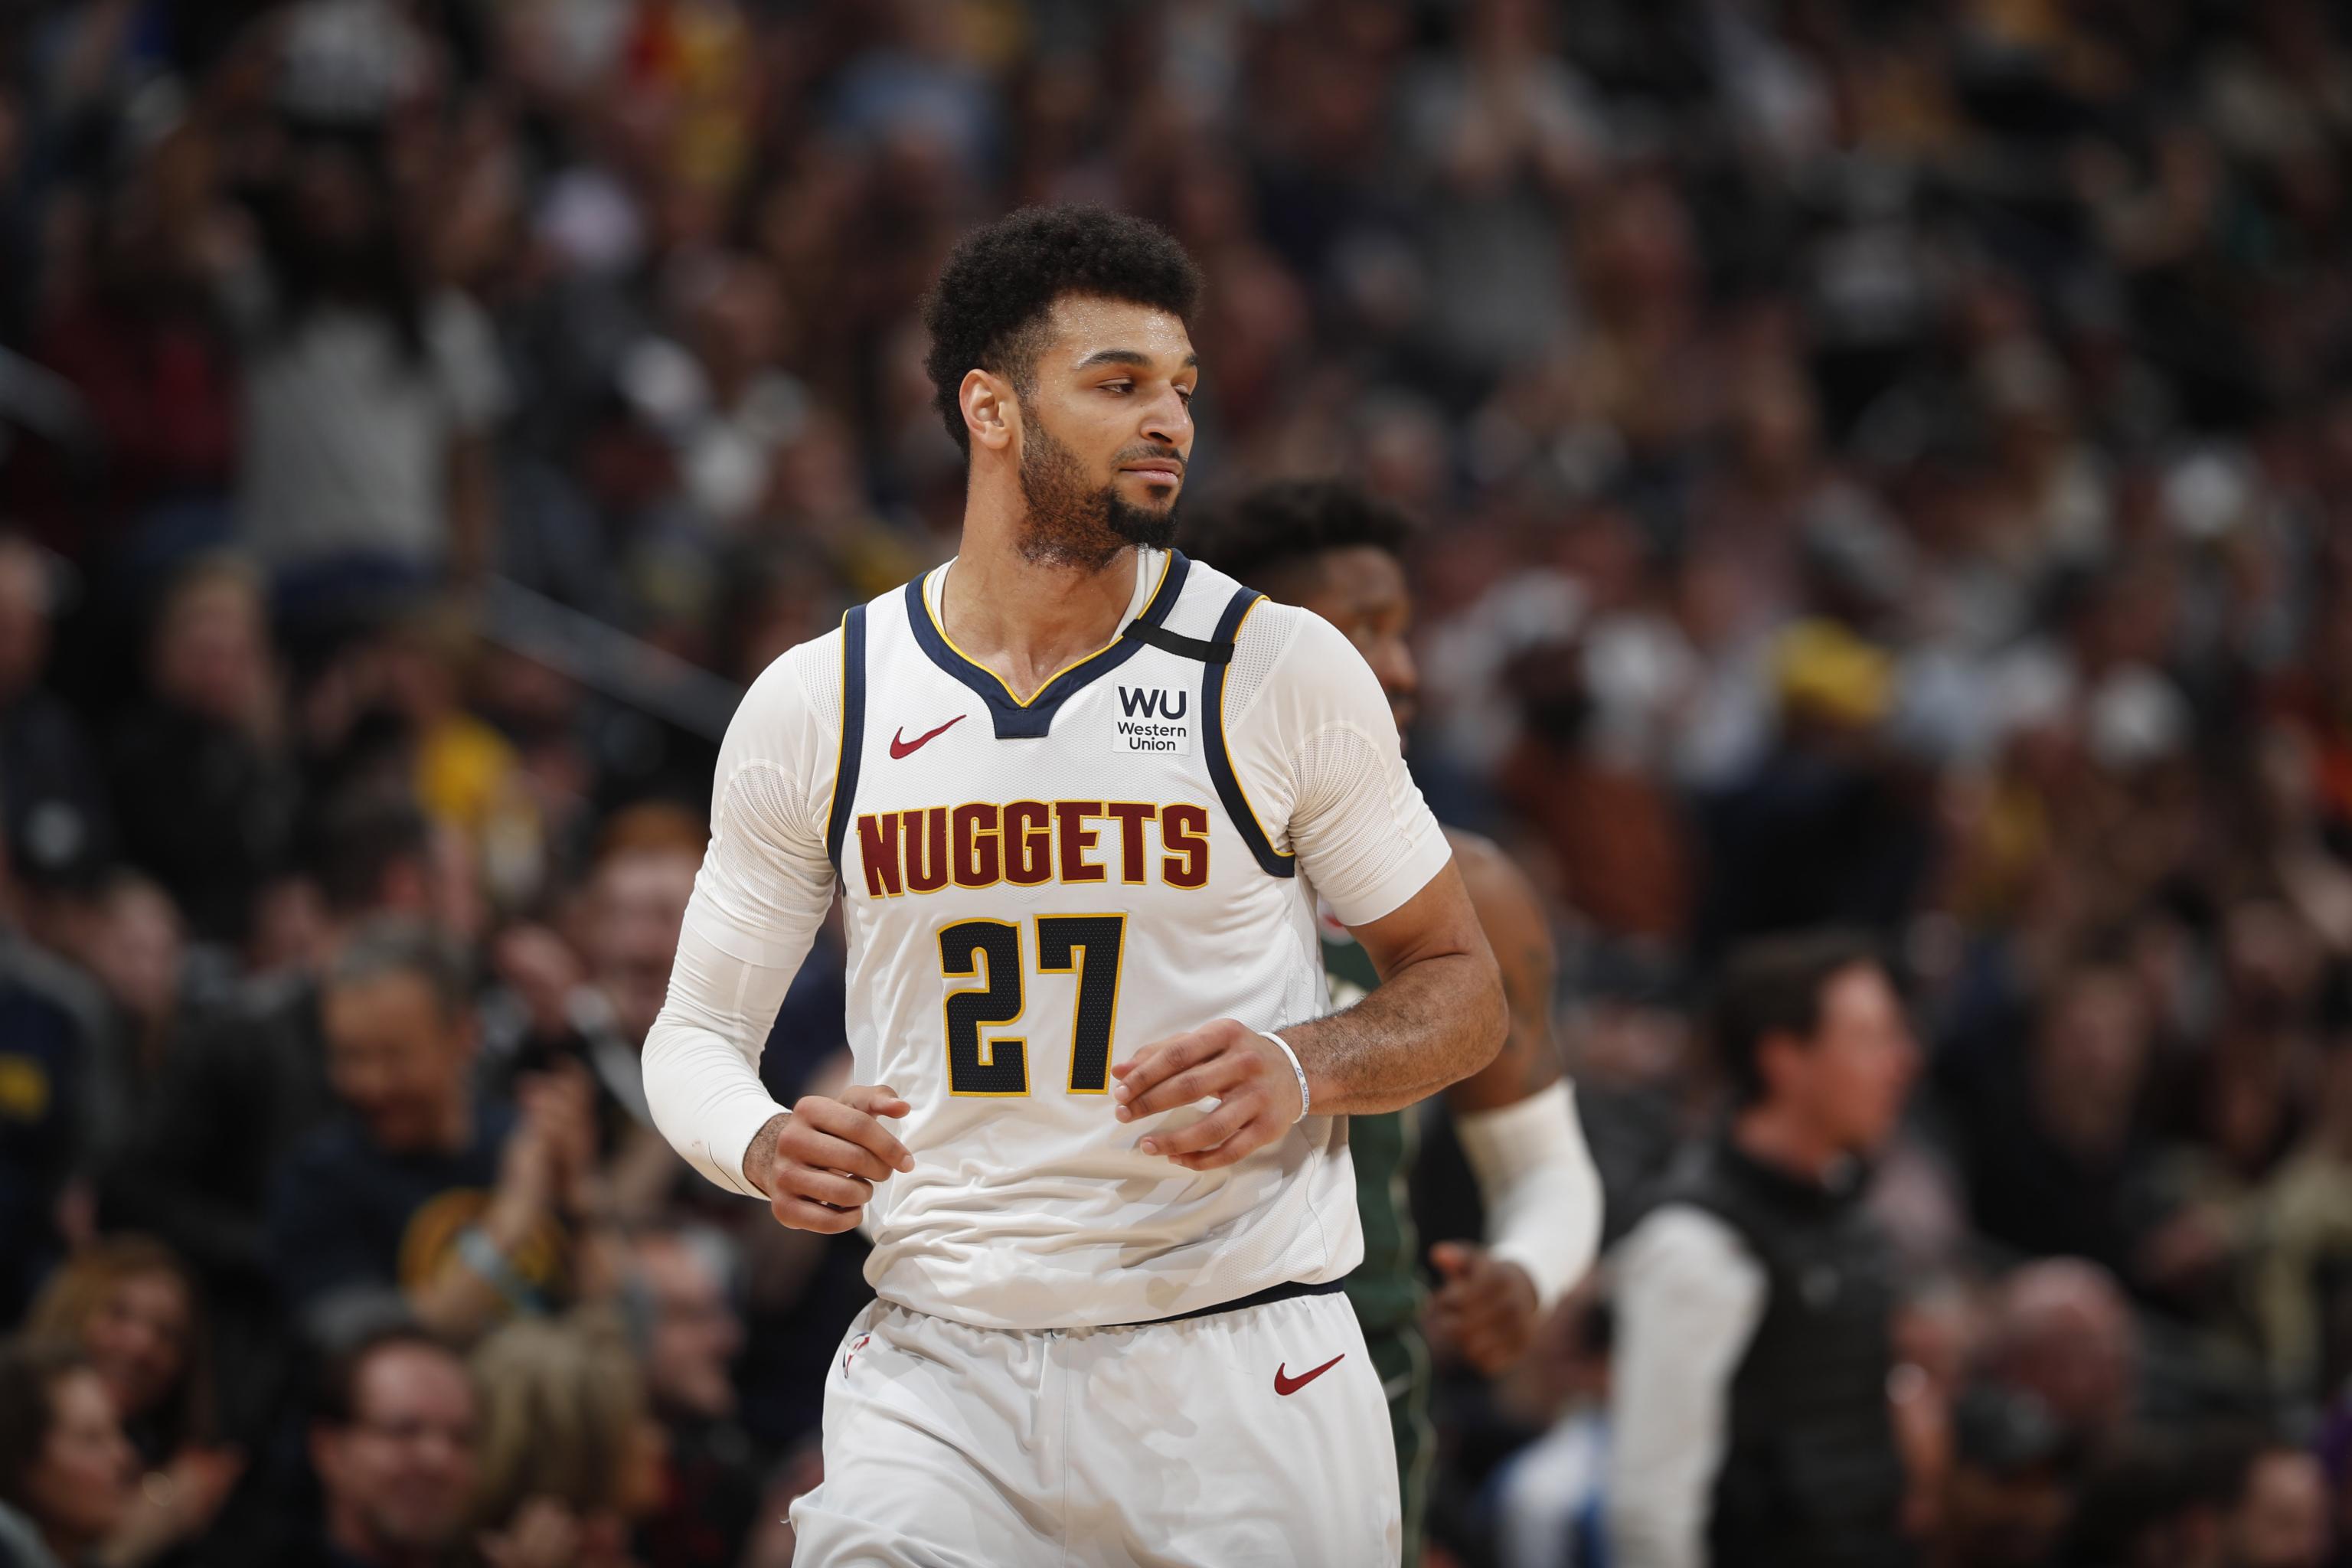 Jamal Sex - Jamal Murray Apologizes After Alleged Instagram Hacker Posts Oral ...